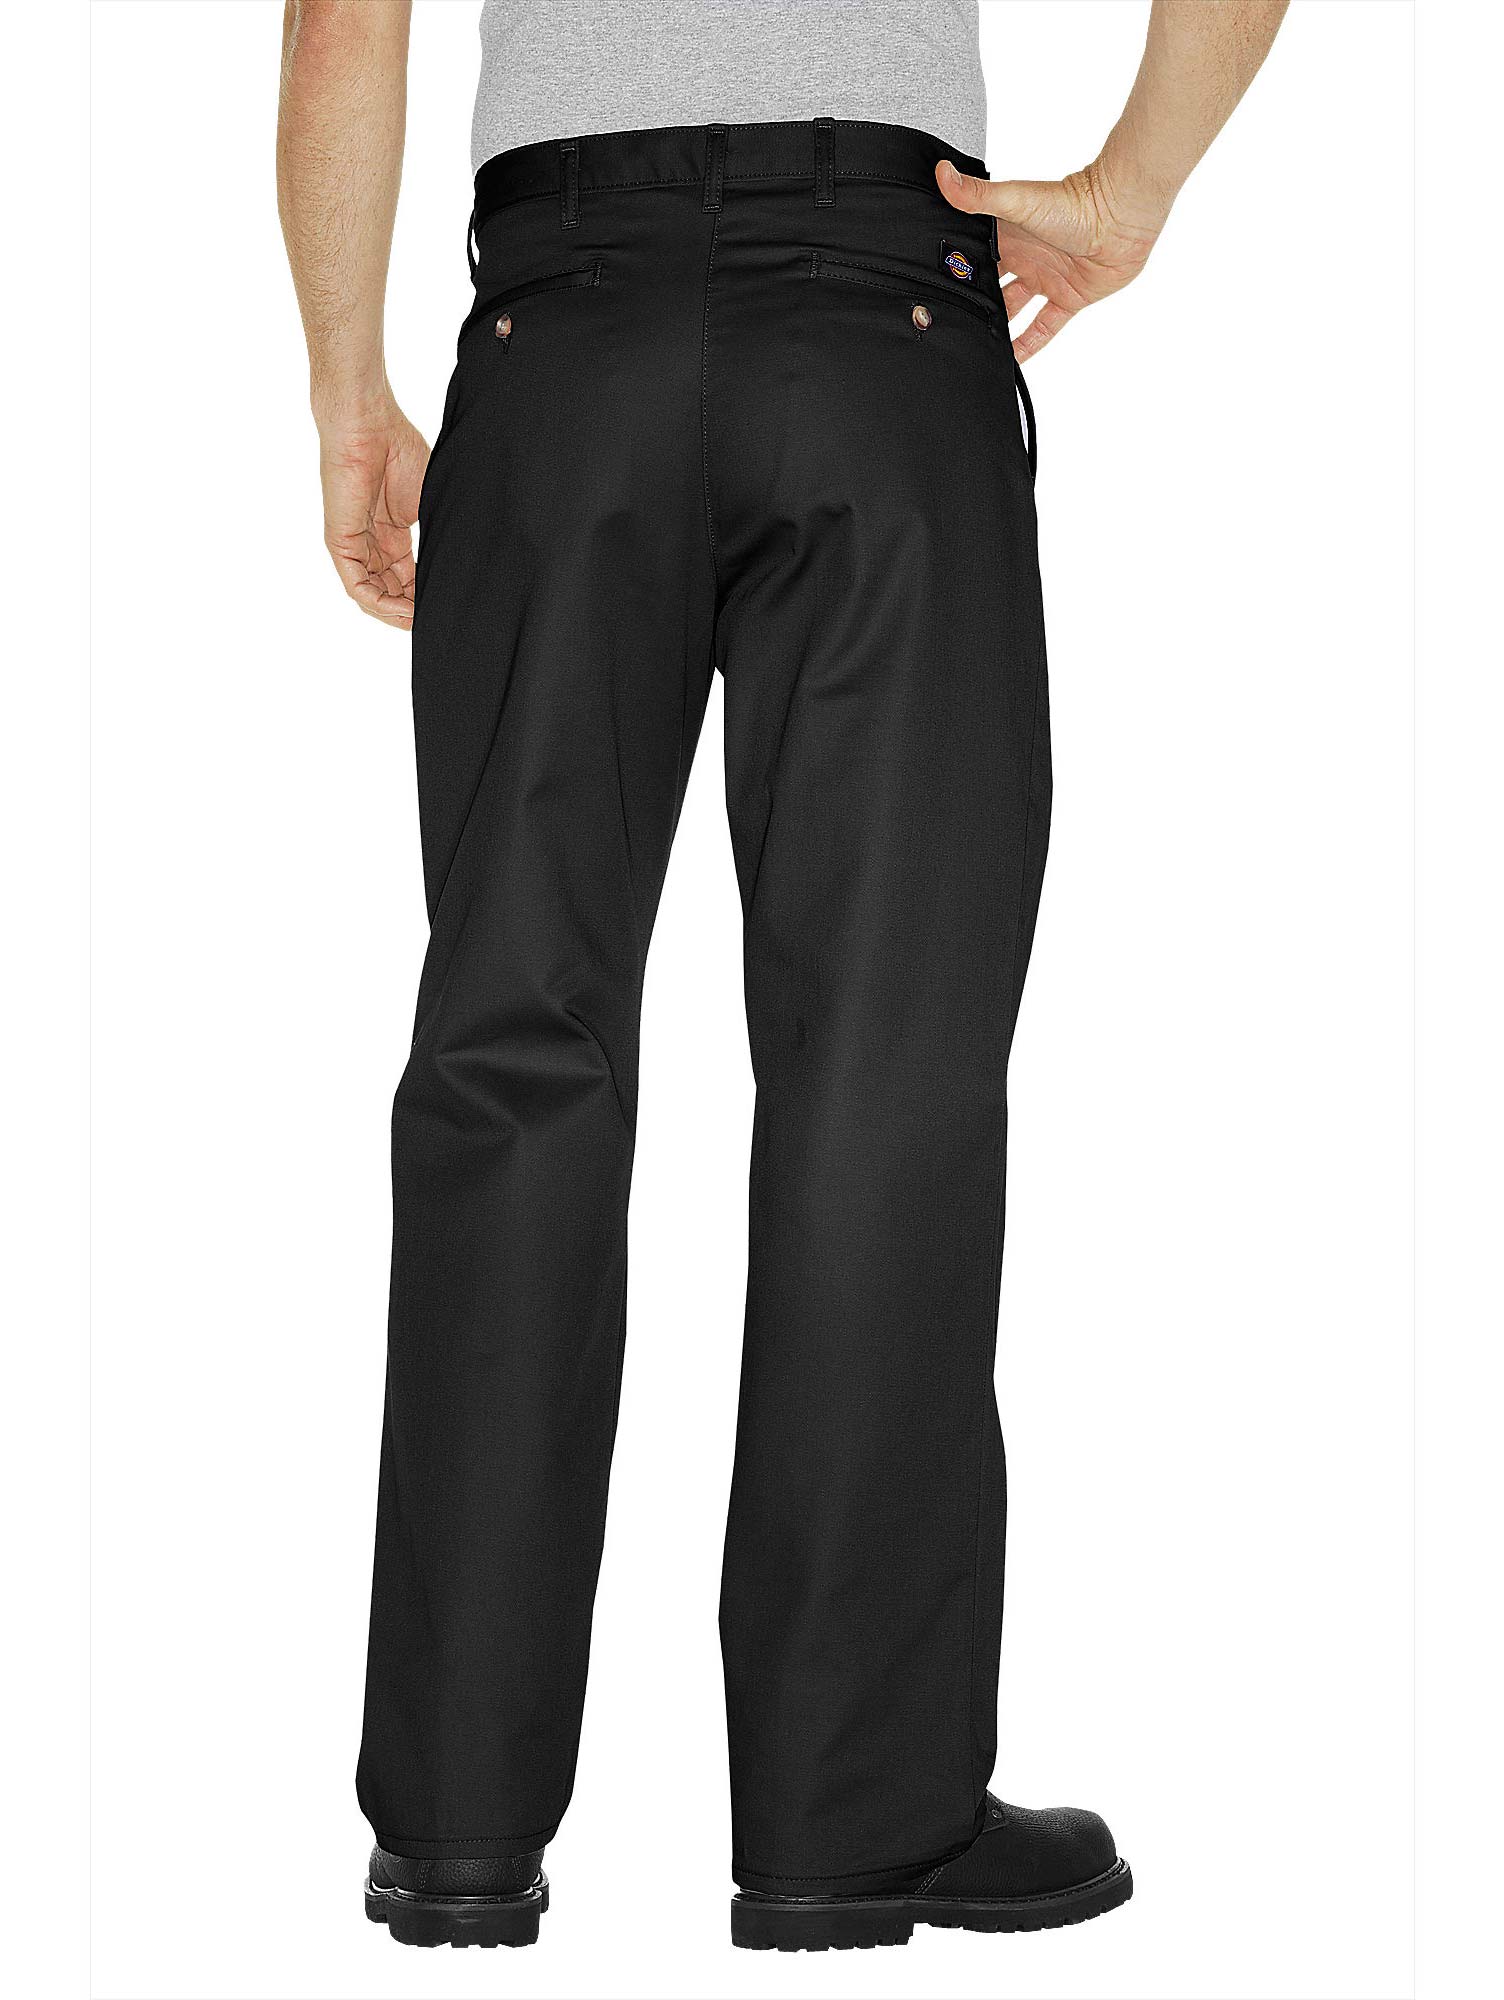 Dickies Relaxed Fit 100% Cotton Work Pant - WP314